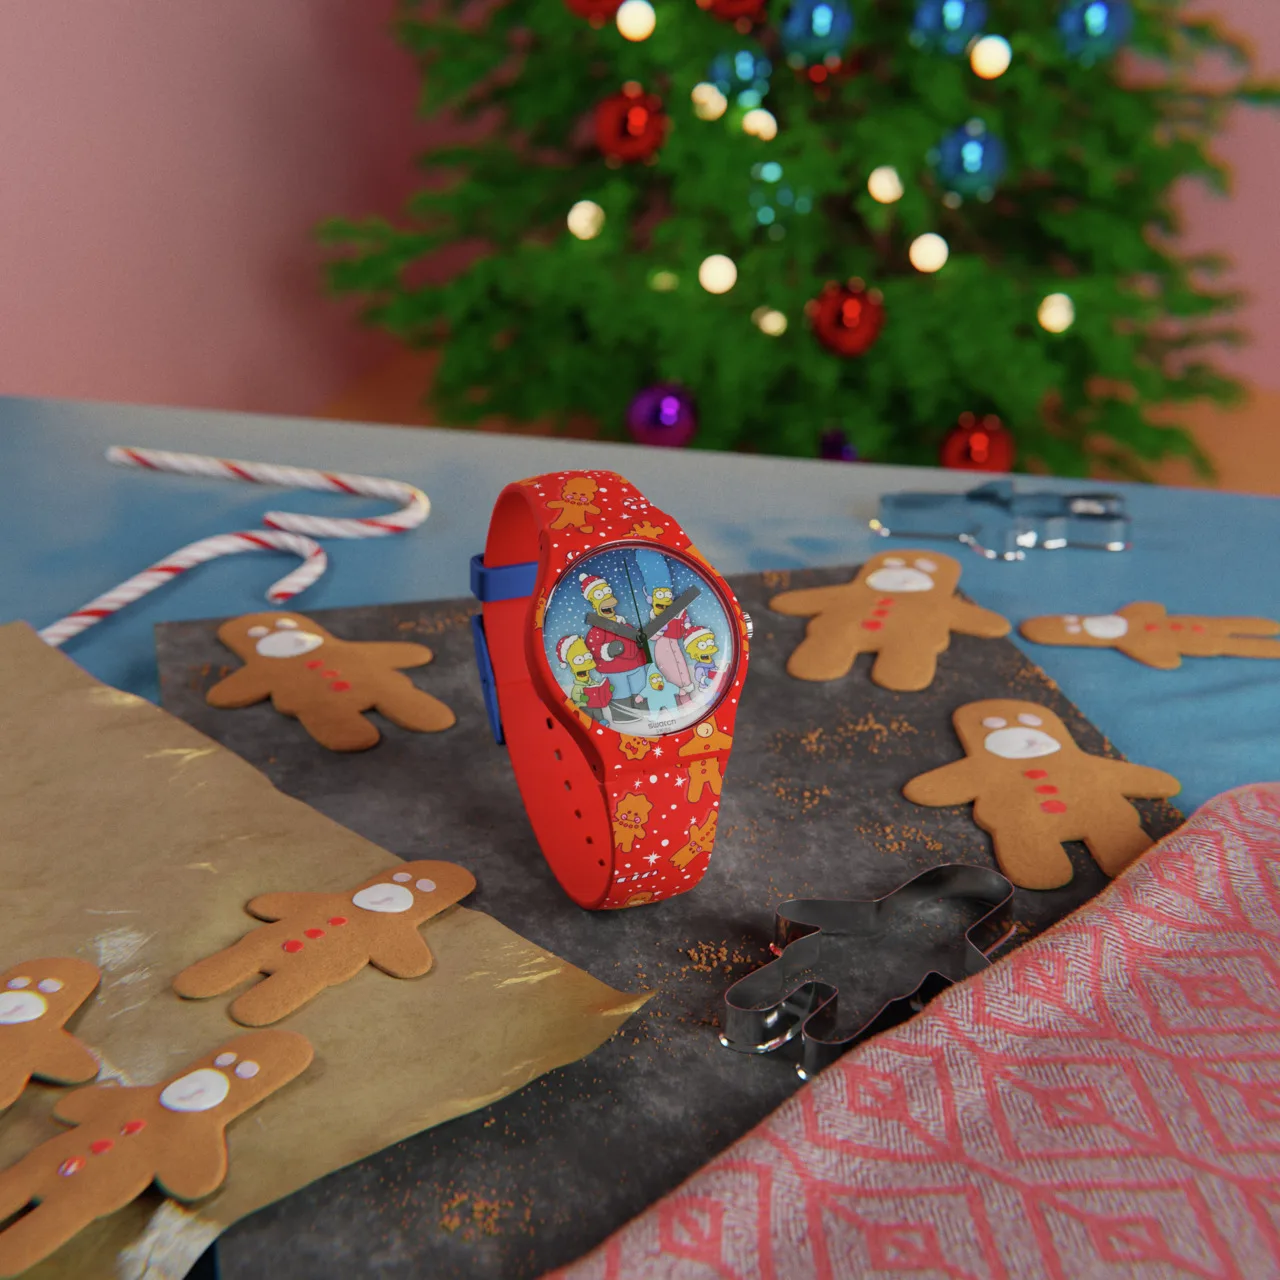 Get into the Holiday spirit with The Simpsons and Swatch